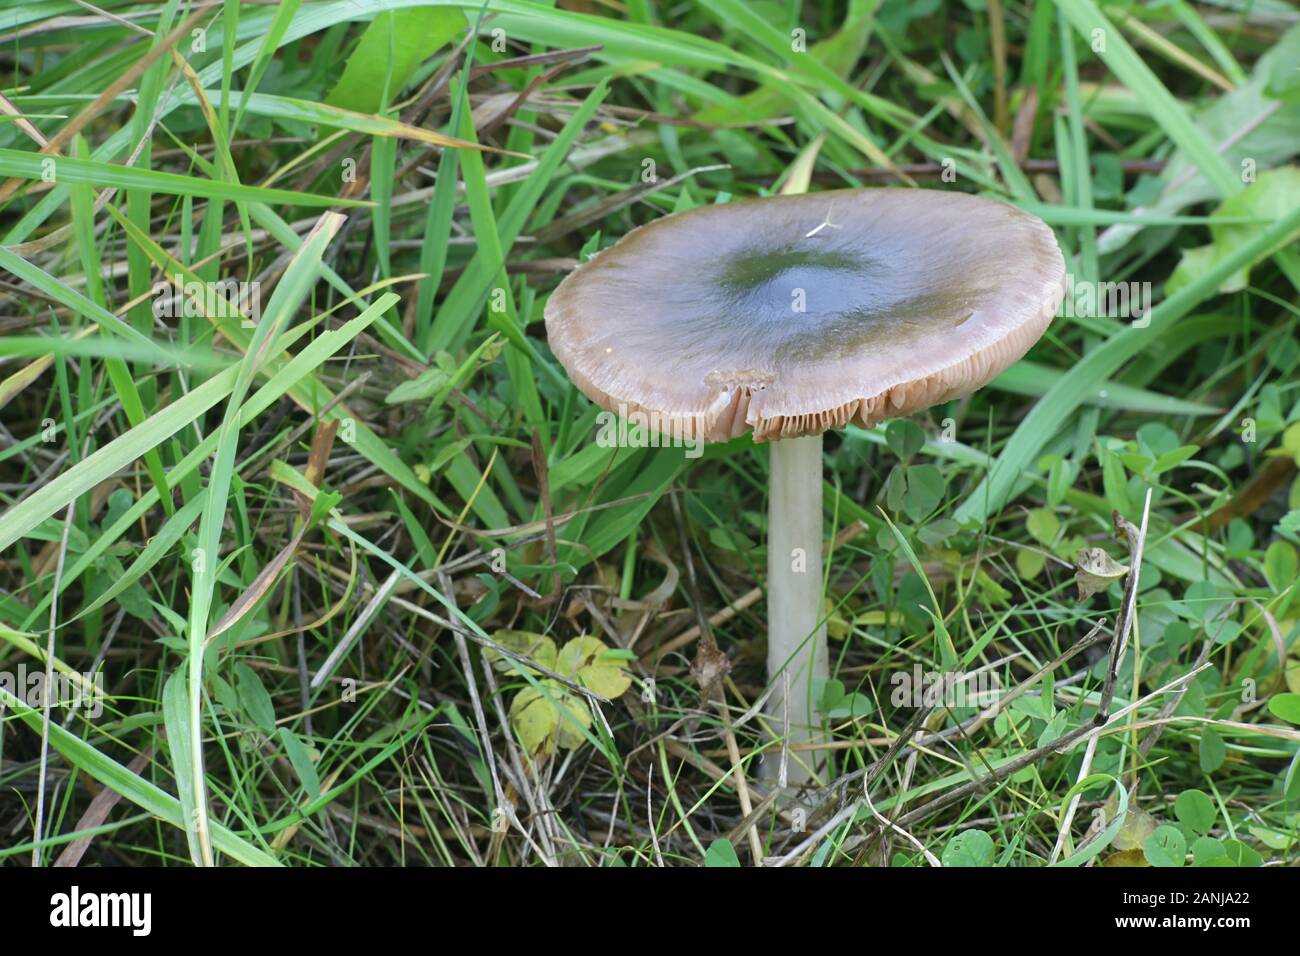 Volvopluteus gloiocephalus, known as the big sheath mushroom, rose-gilled grisette, or stubble rosegill, wild mushrooms from Finland Stock Photo